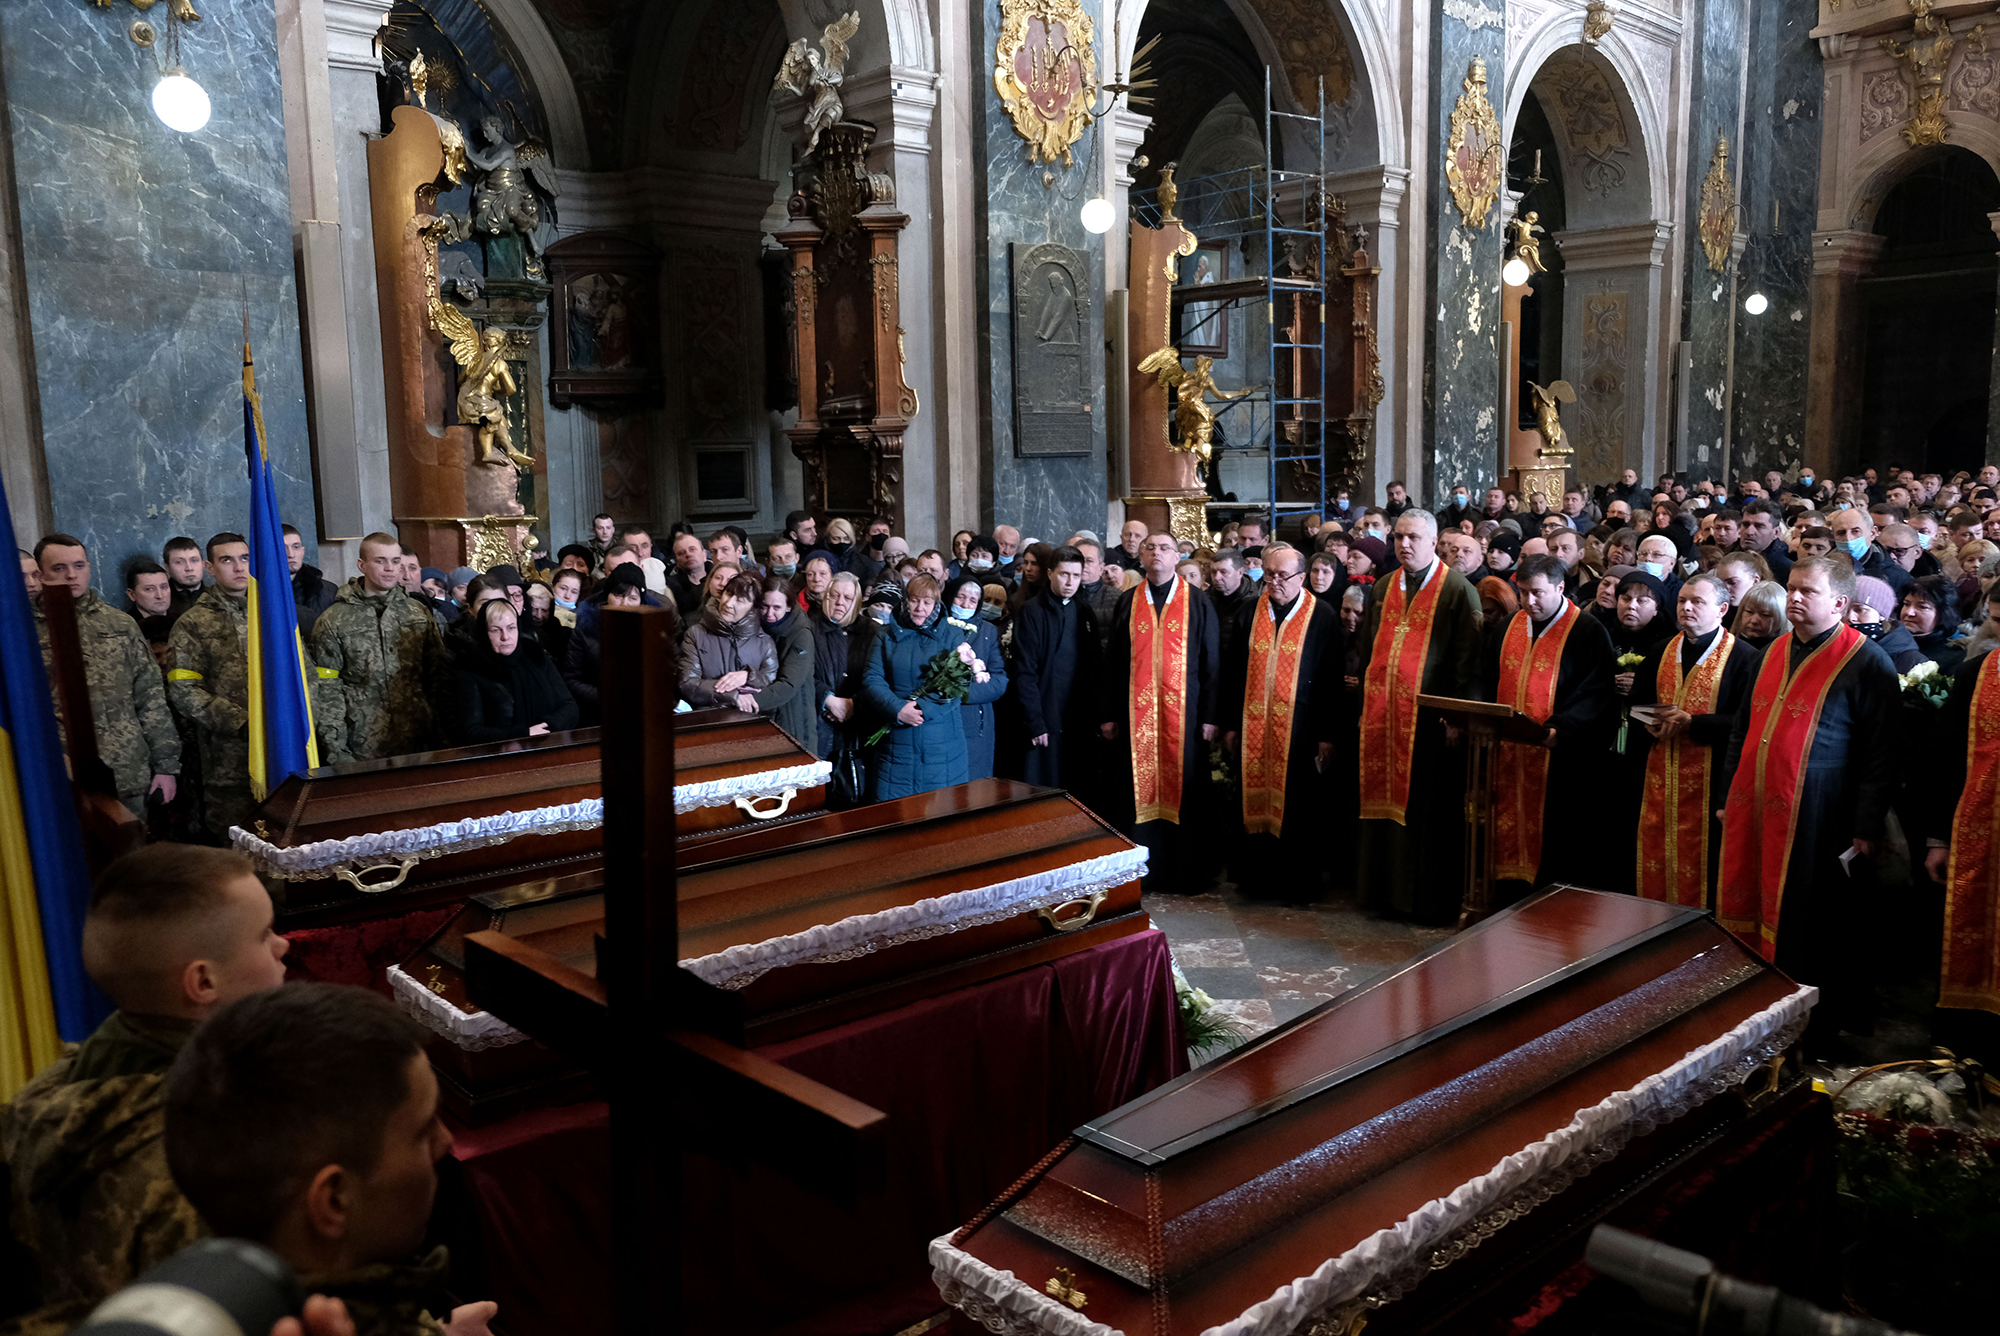 Senior Soldier Andrii Stafanyshyn, 39, Senior Lieutenant Taras Didukh, 25, and Sergeant Dmytro Kabakov, 58, were laid to rest in a service at the Saints Peter and Paul Garrysin Church in Lviv, Ukraine, on Friday, March 11.